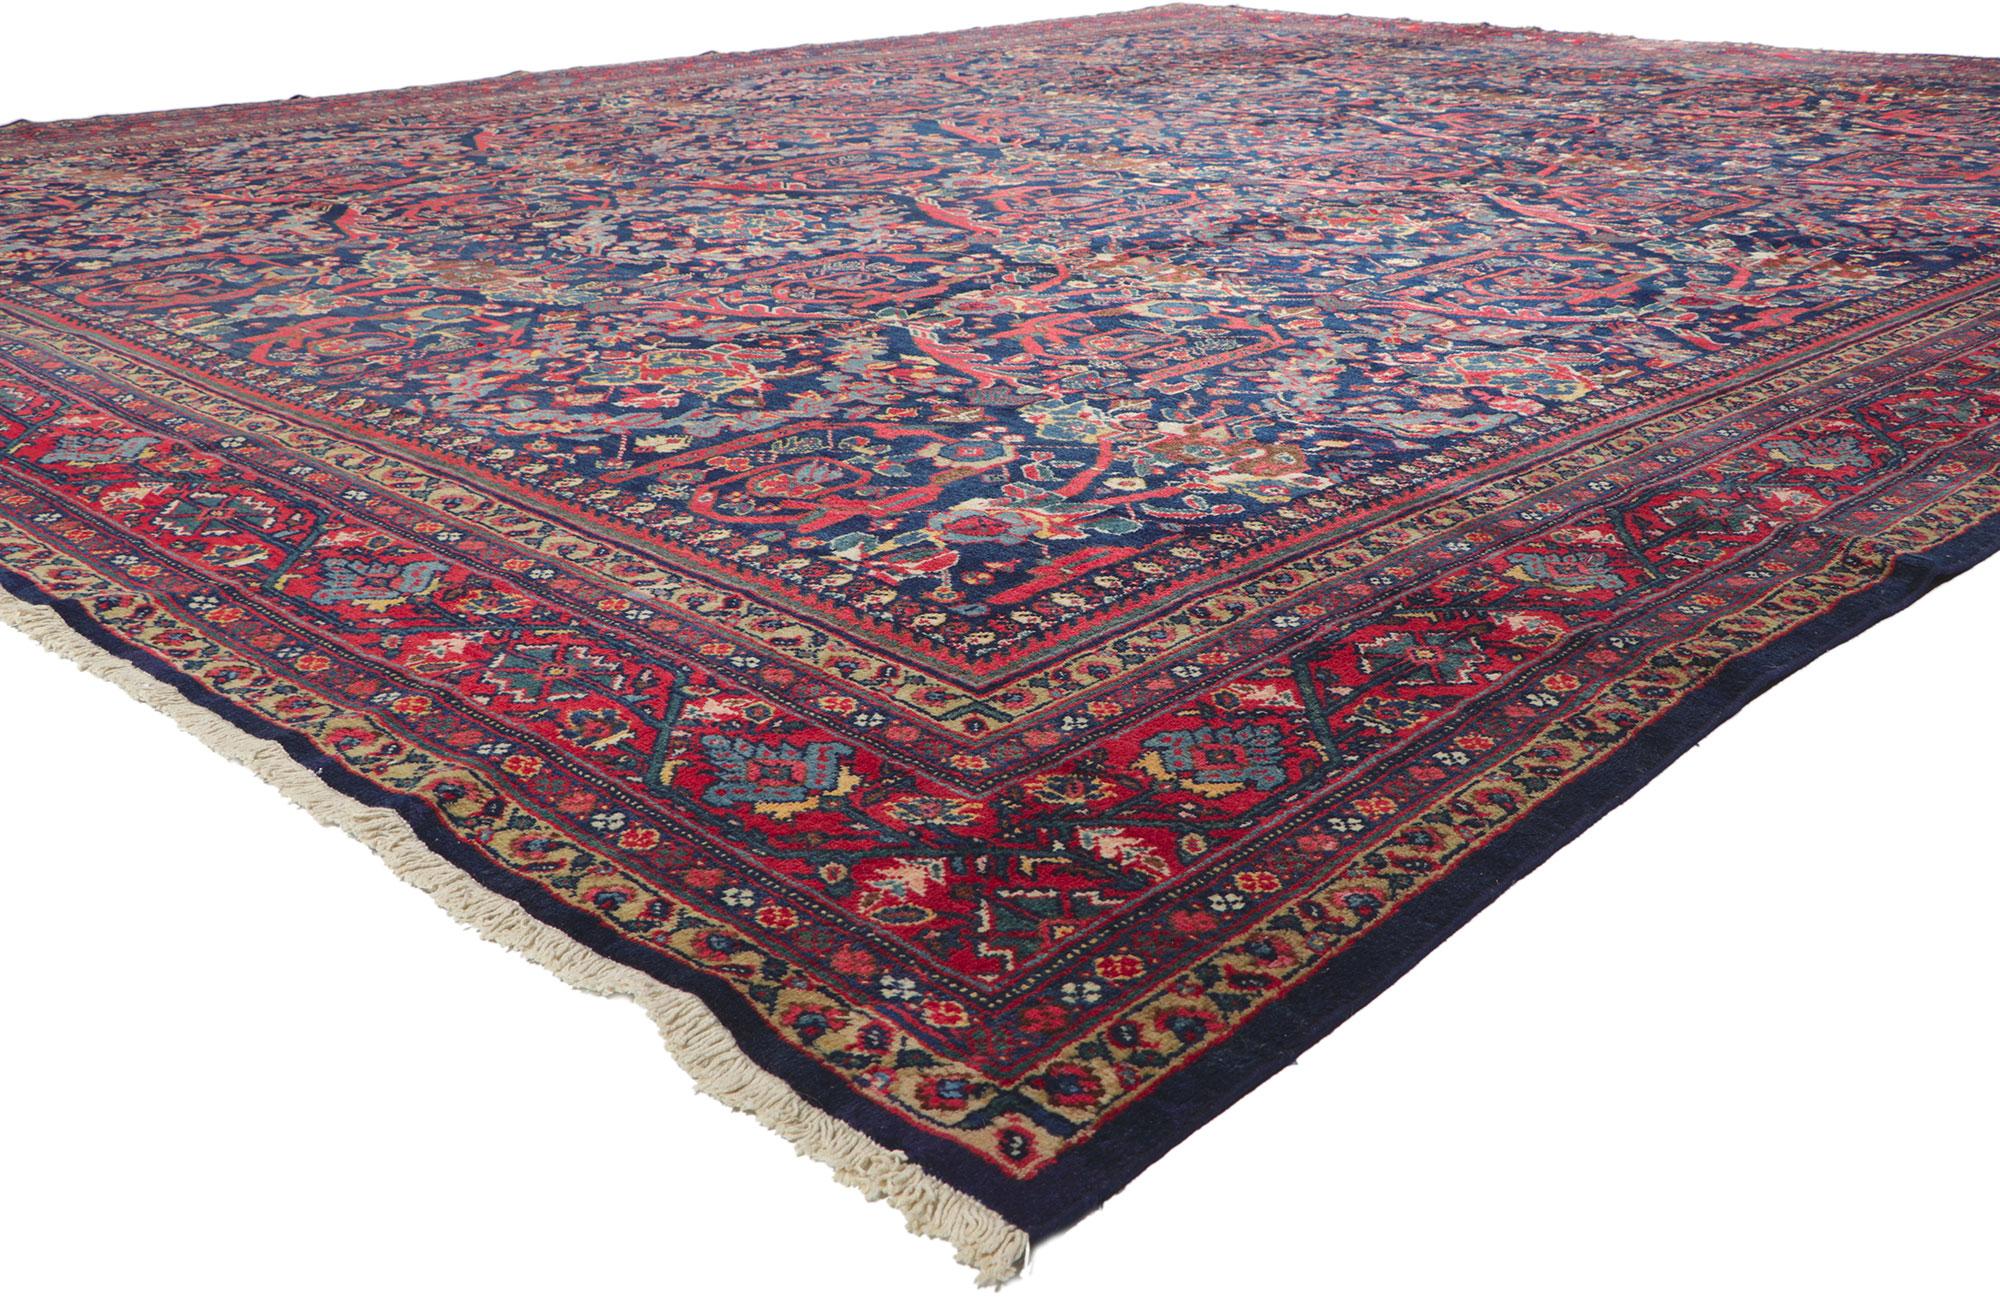 78520 Antique Persian Mahal Rug with Sultanabad Design, 14'02 x 17'06.
Displaying the renowned Mustafavi pattern with incredible detail and texture, this oversized Persian Mahal rug is a captivating vision of woven beauty. The timeless design and